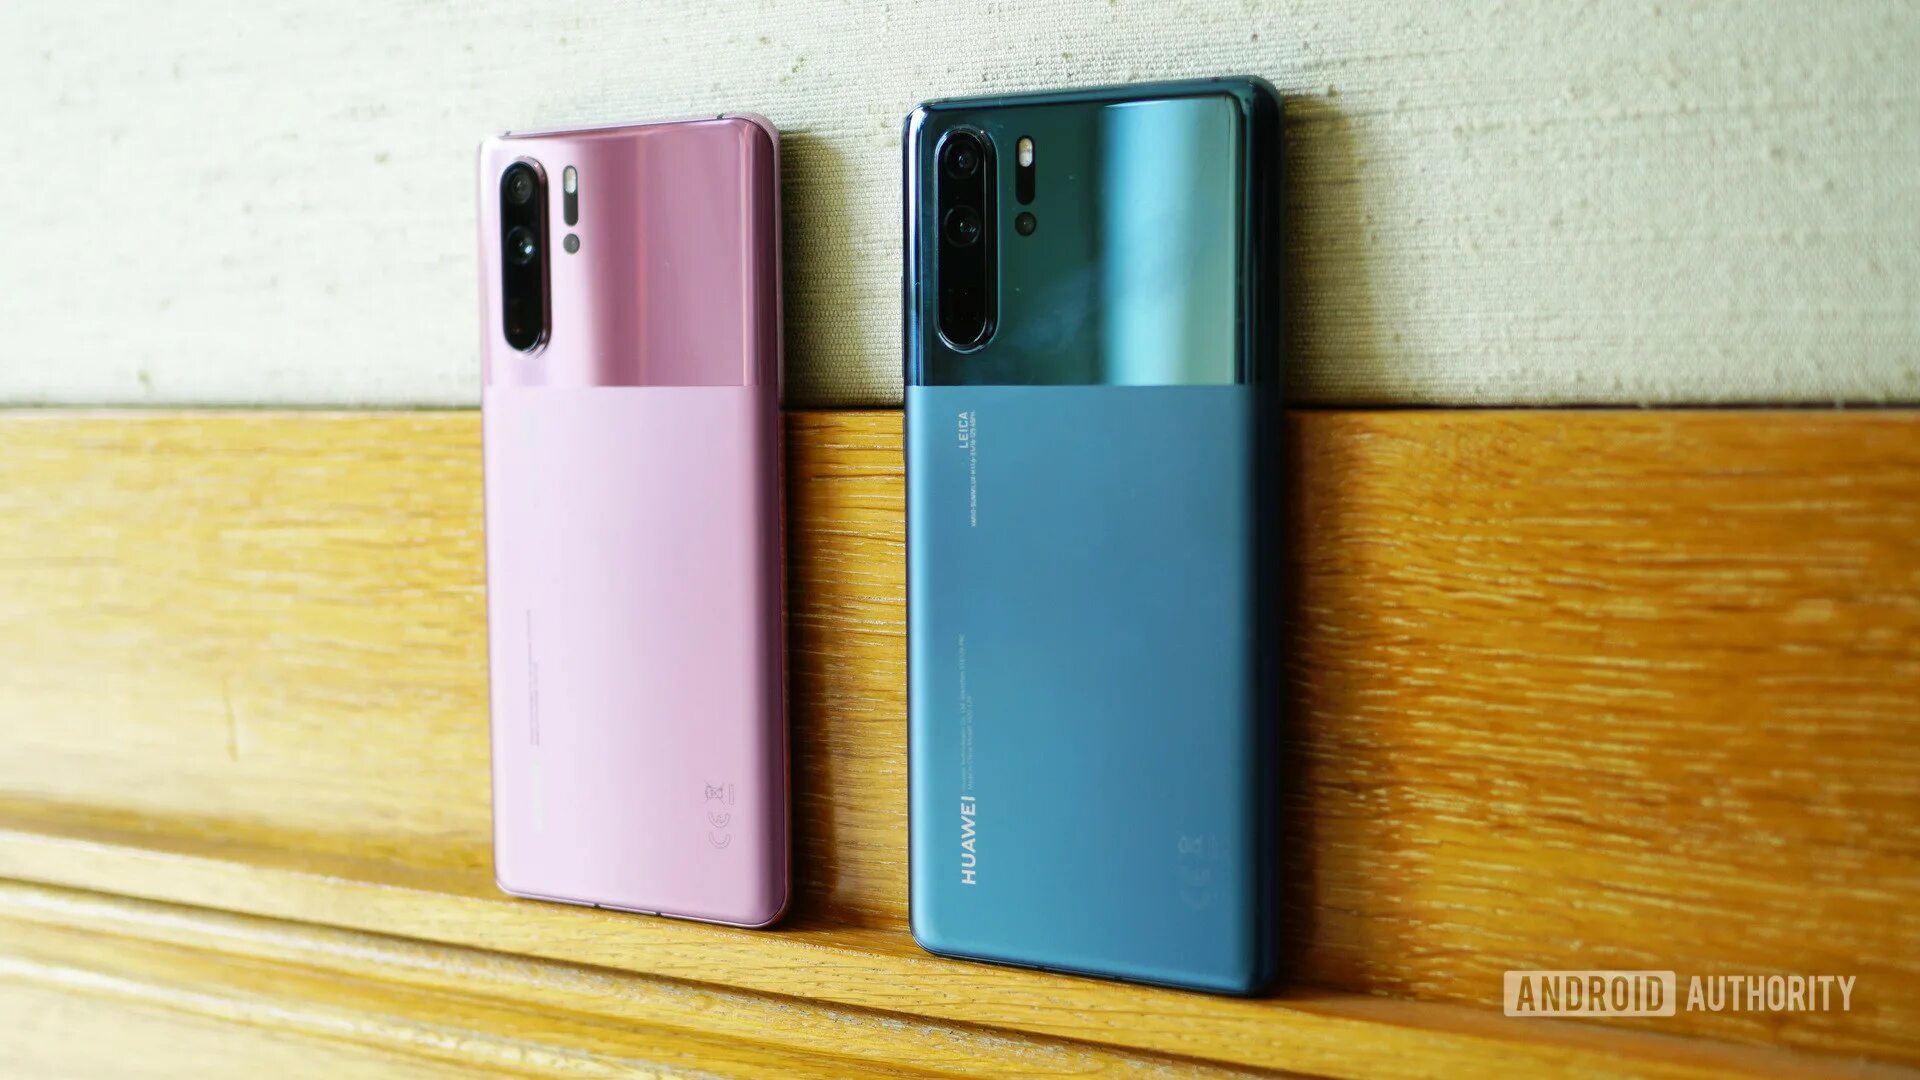 Huawei new edition. Huawei p30 Pro New Edition. Huawei p30 Pro цвета. Huawei p30 Pro New Edition main Wallpaper.